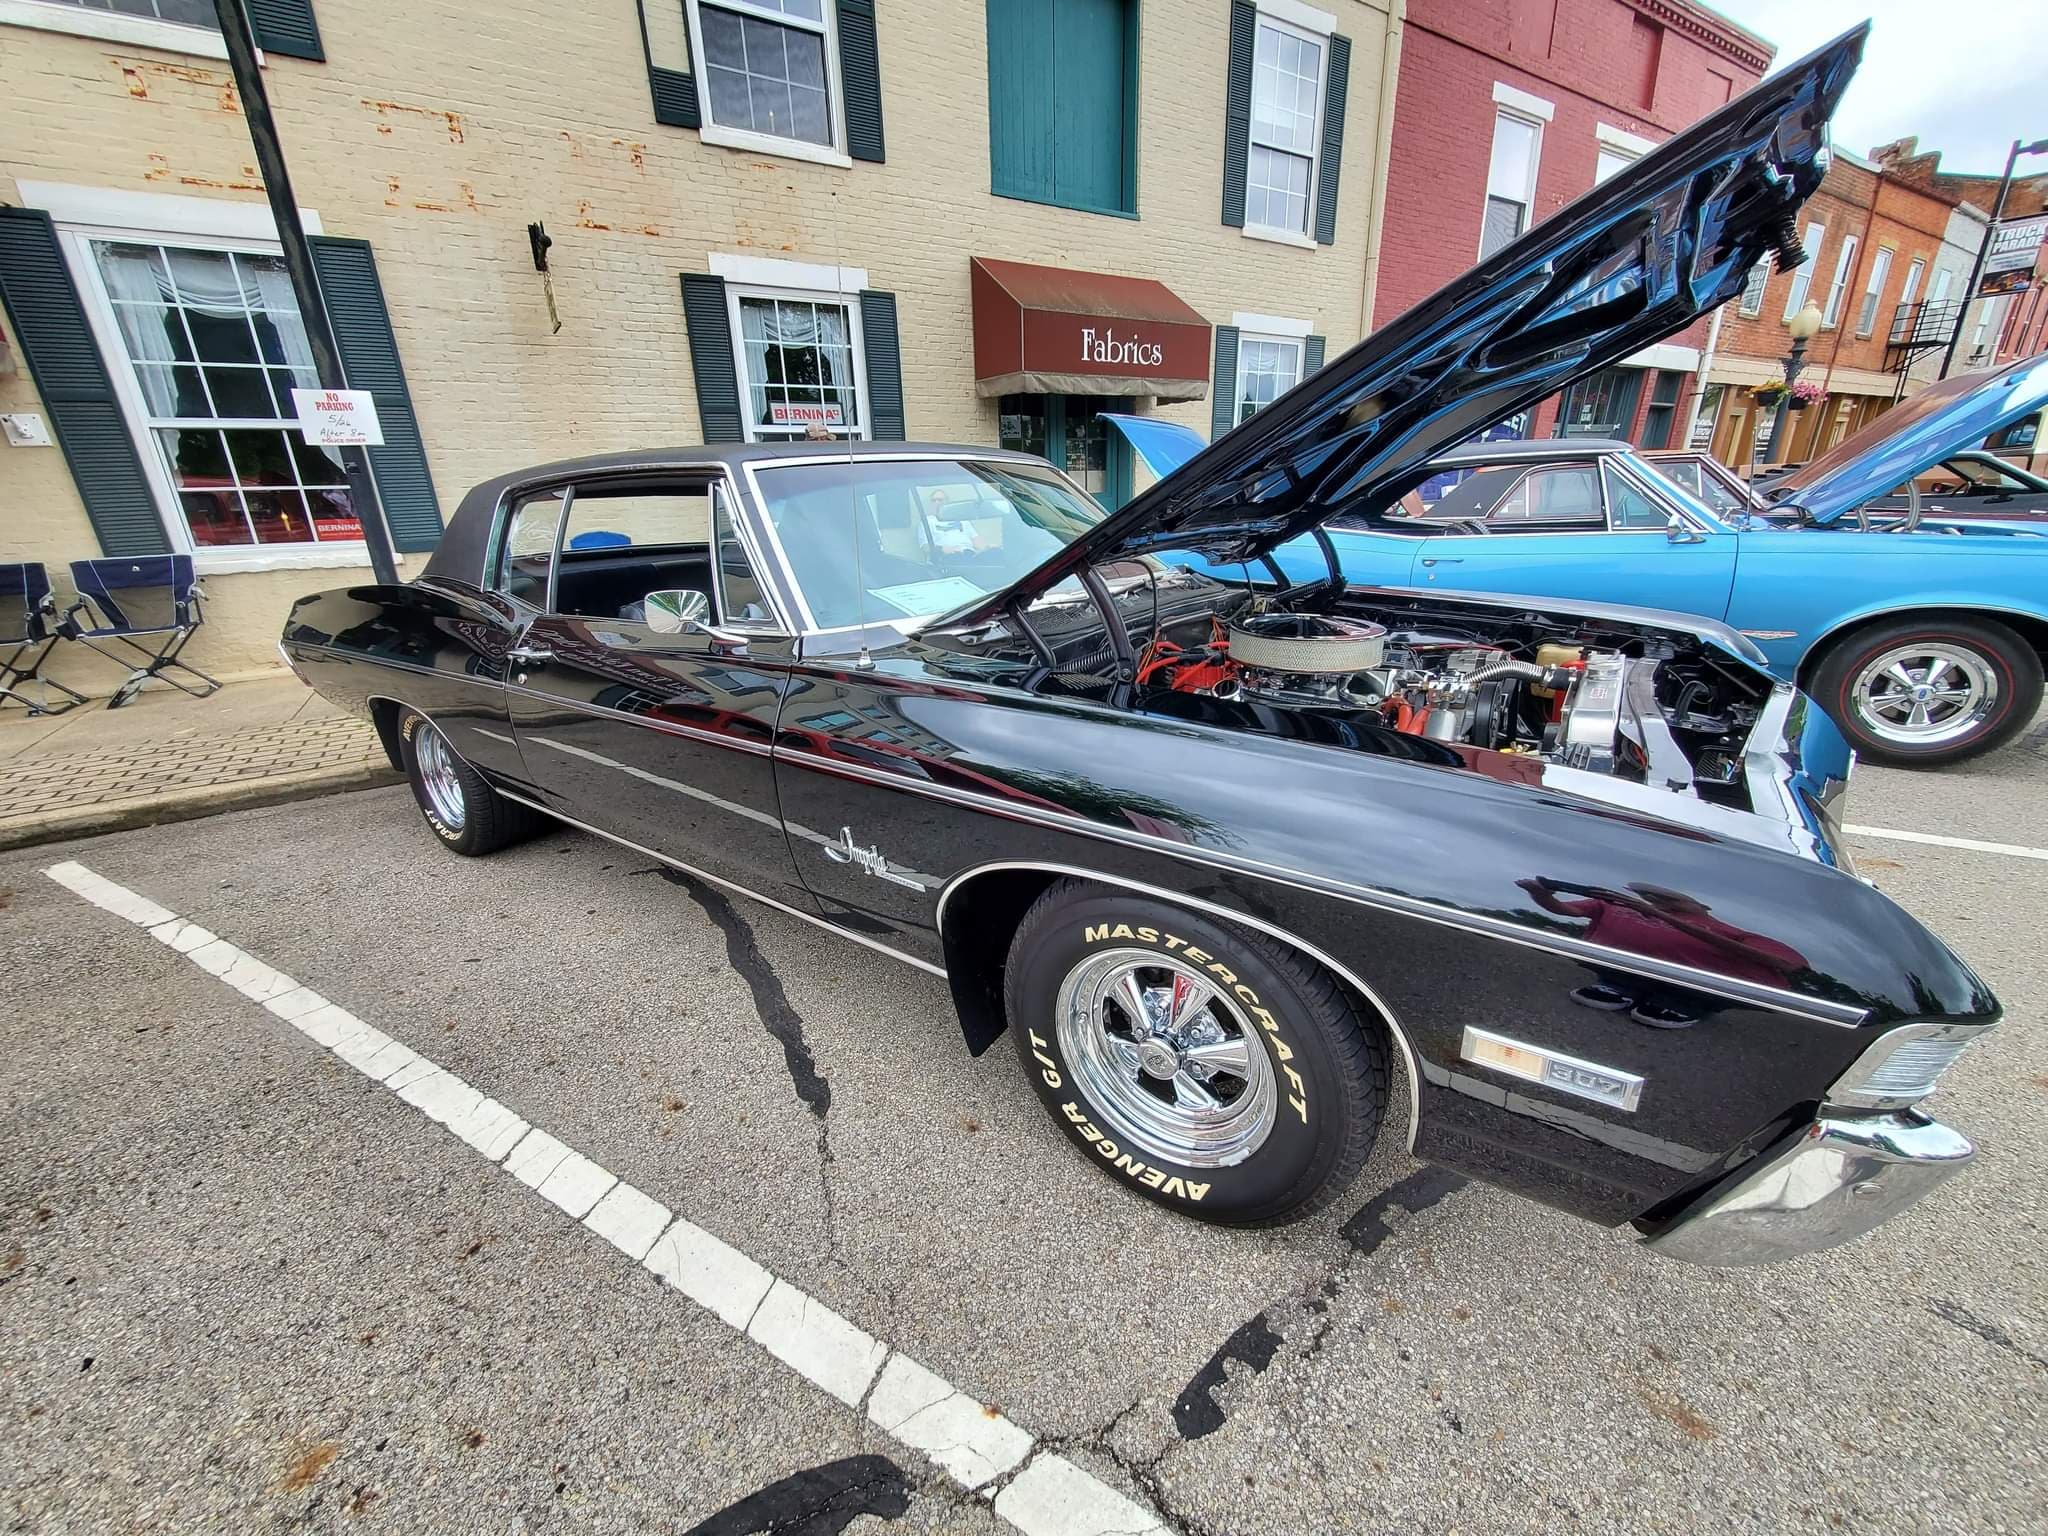 Chillicothe Feast of the Flowering Moon Car Show Raises Hundreds for